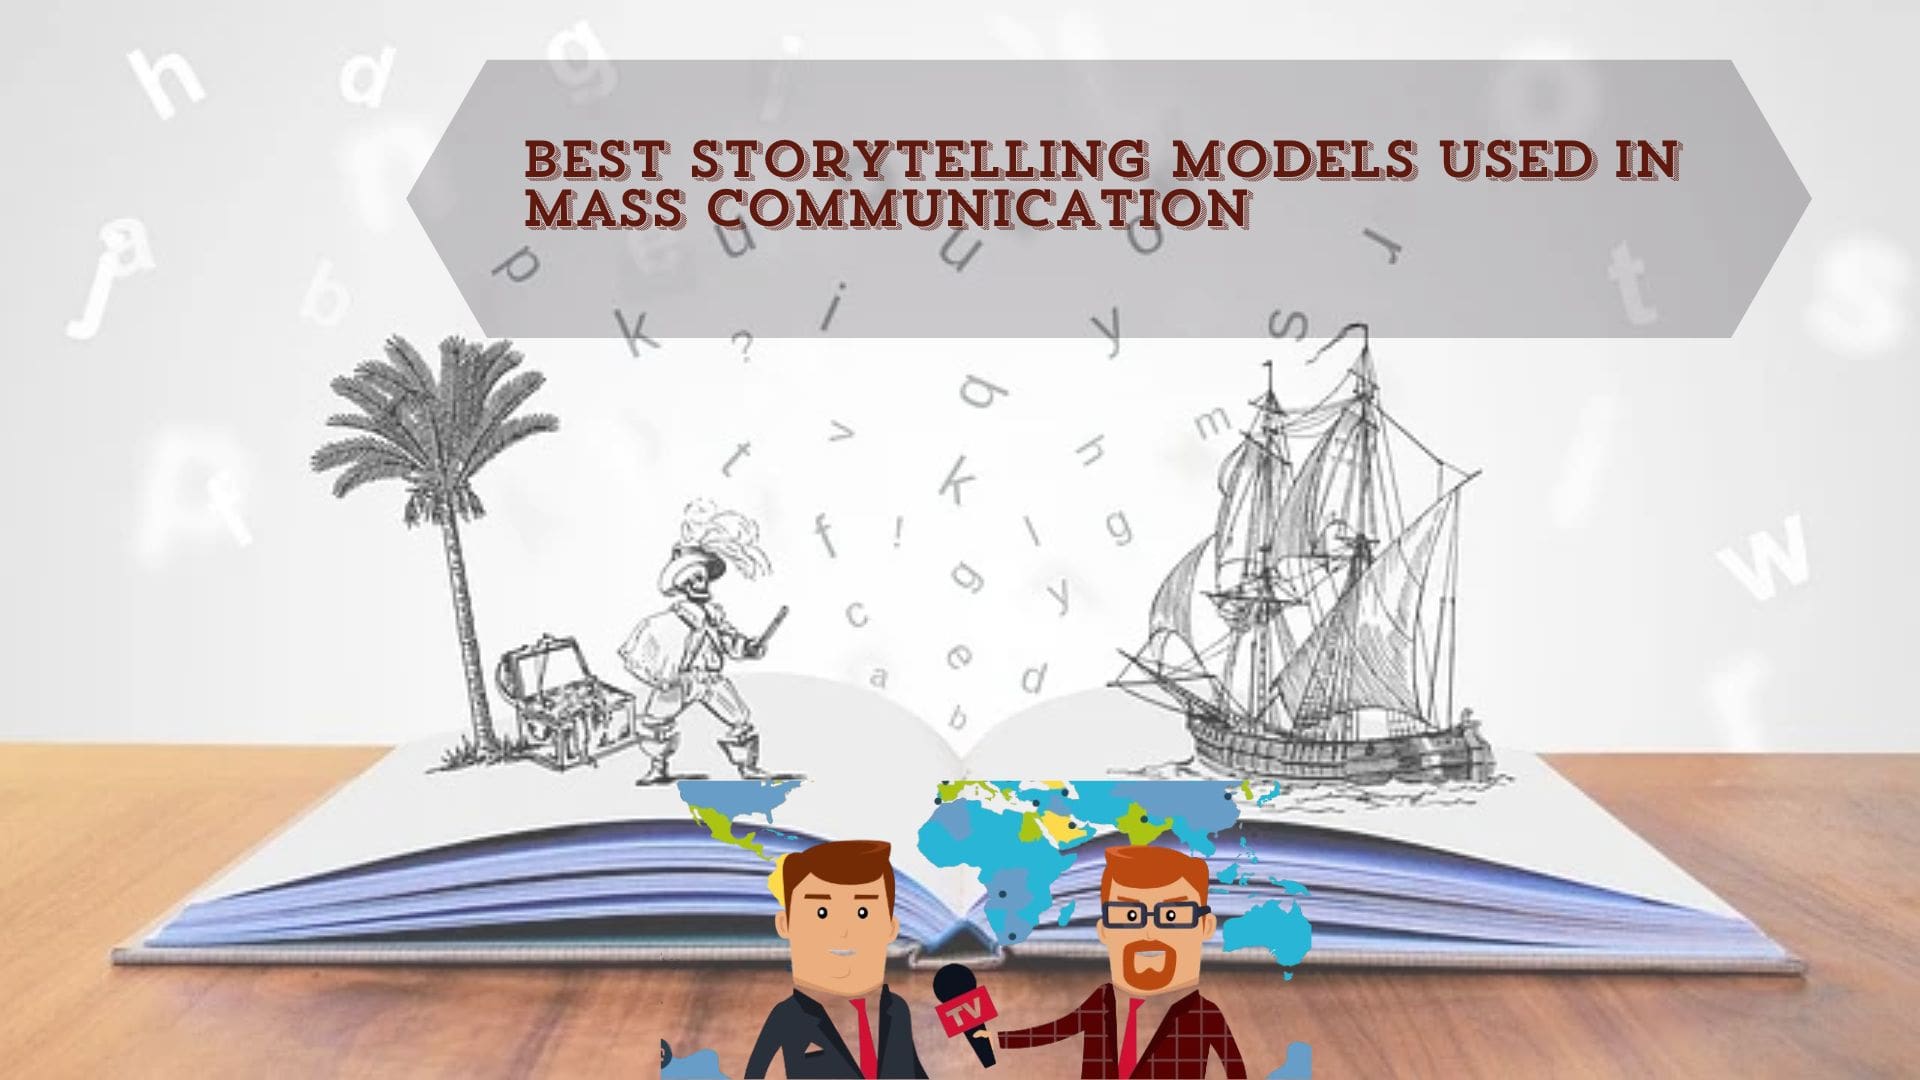 9 of the Best Storytelling Models Used in Mass Communication